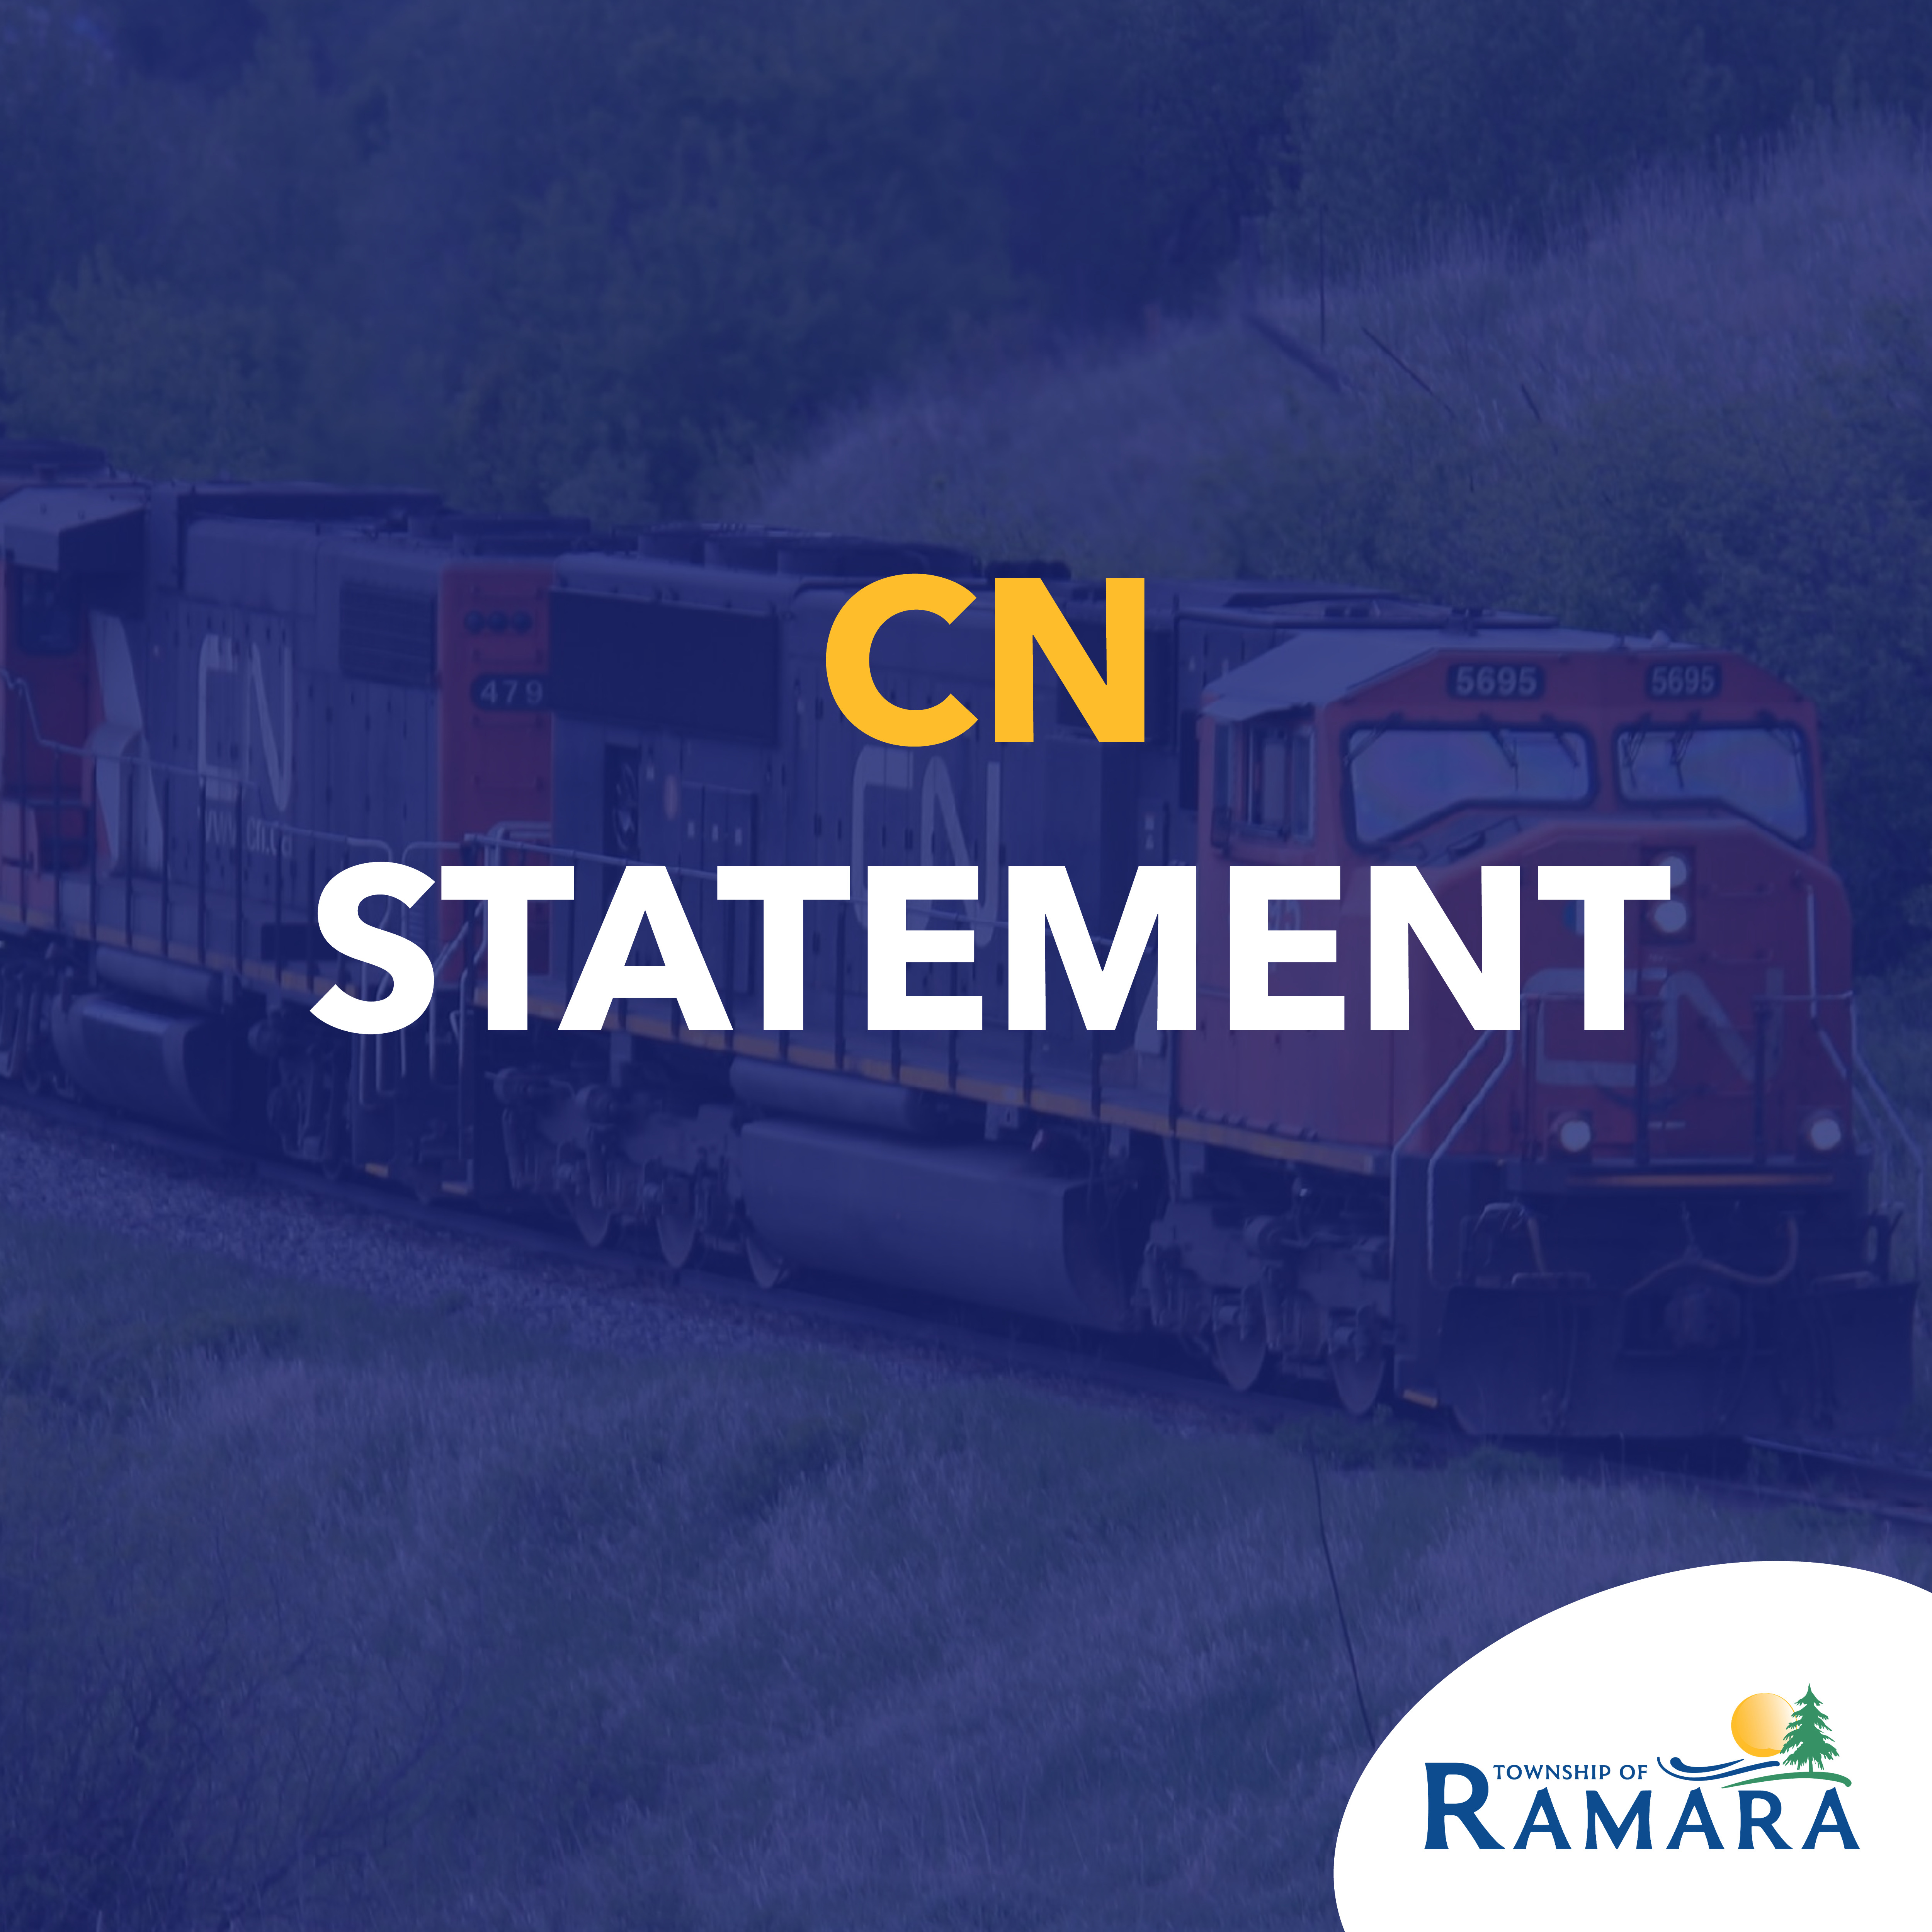 CN Statement letters in the background a train